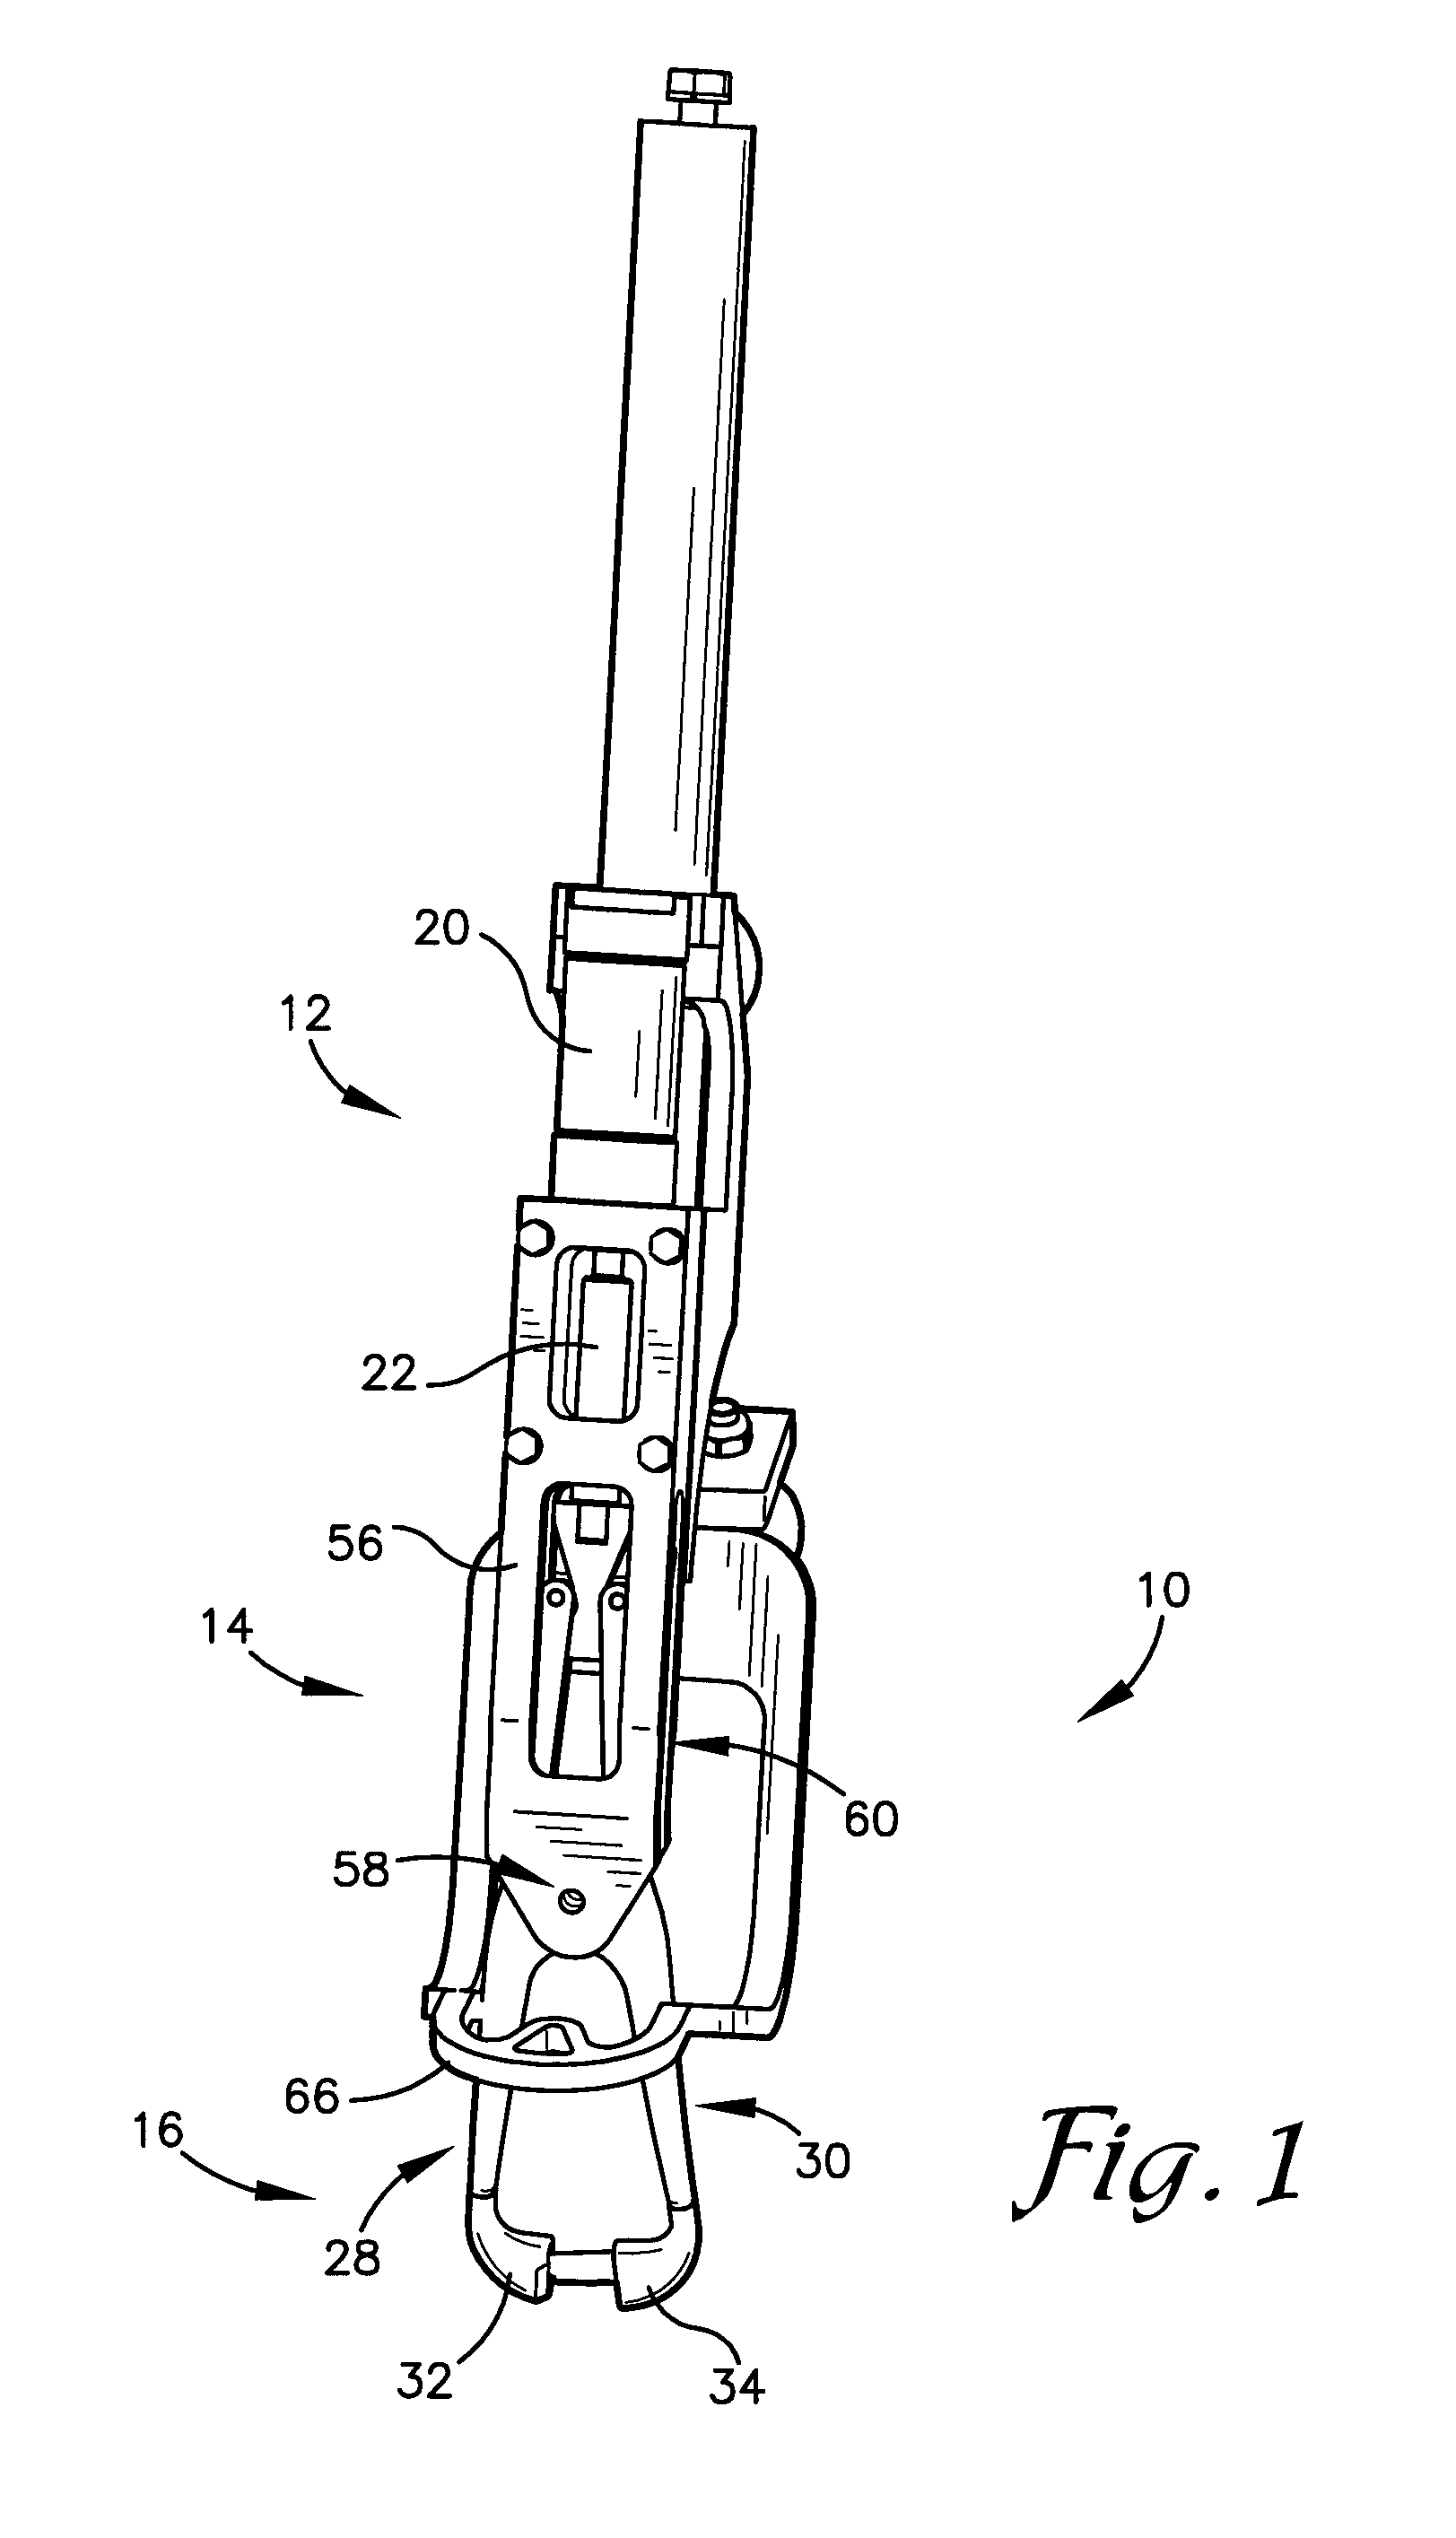 Device and method for clamping and cutting